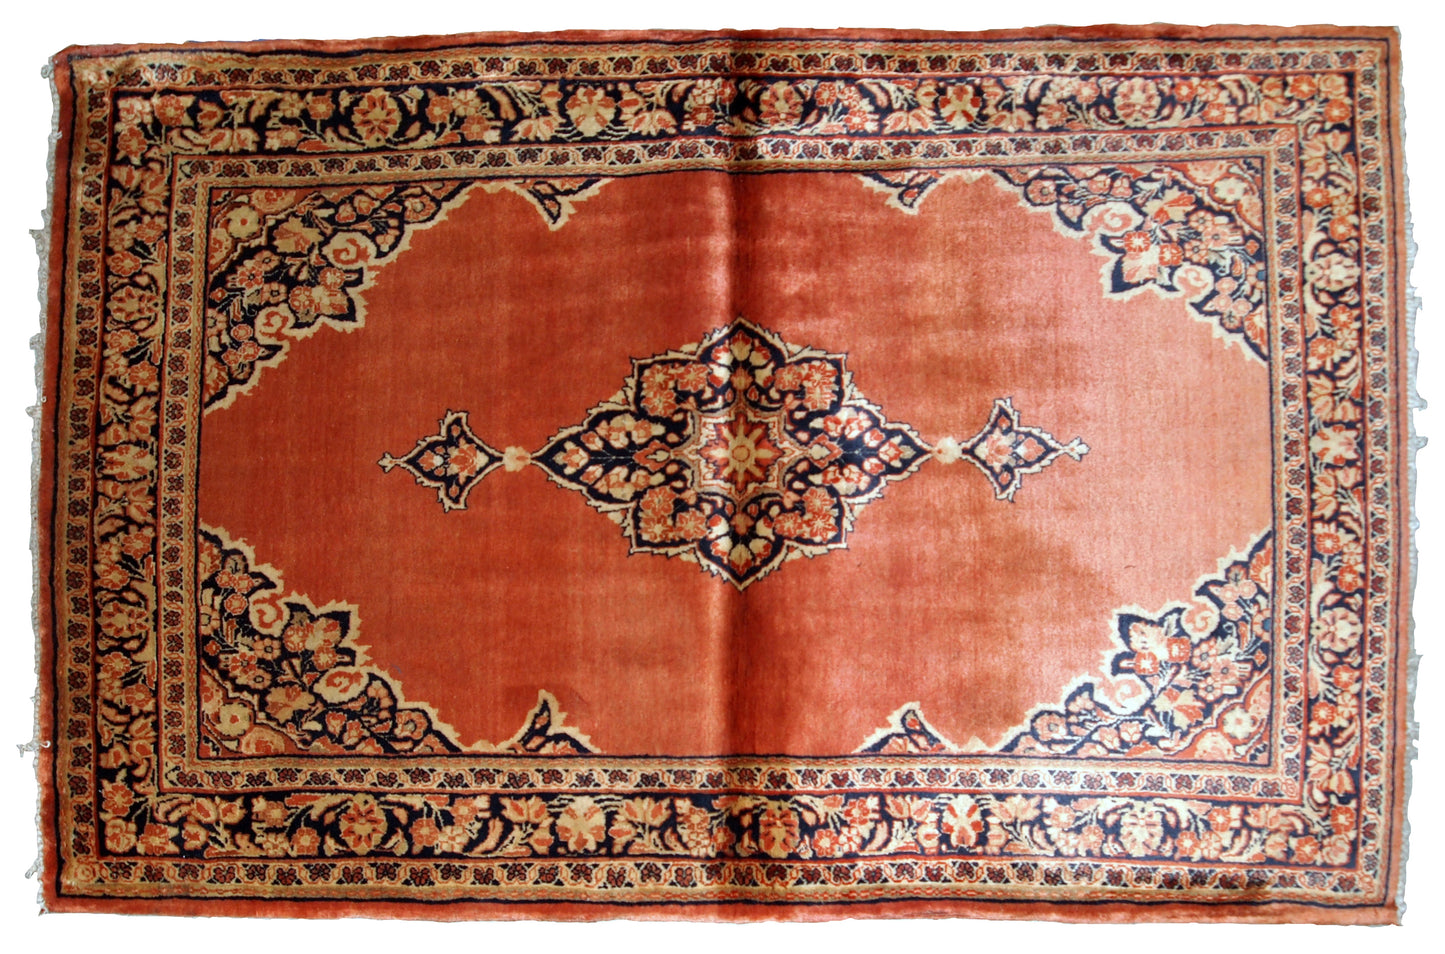 Hand-weaved antique Sarouk rug from the beginning of 20th century. The rug is in original good condition, made in traditional design from the shiny wool.